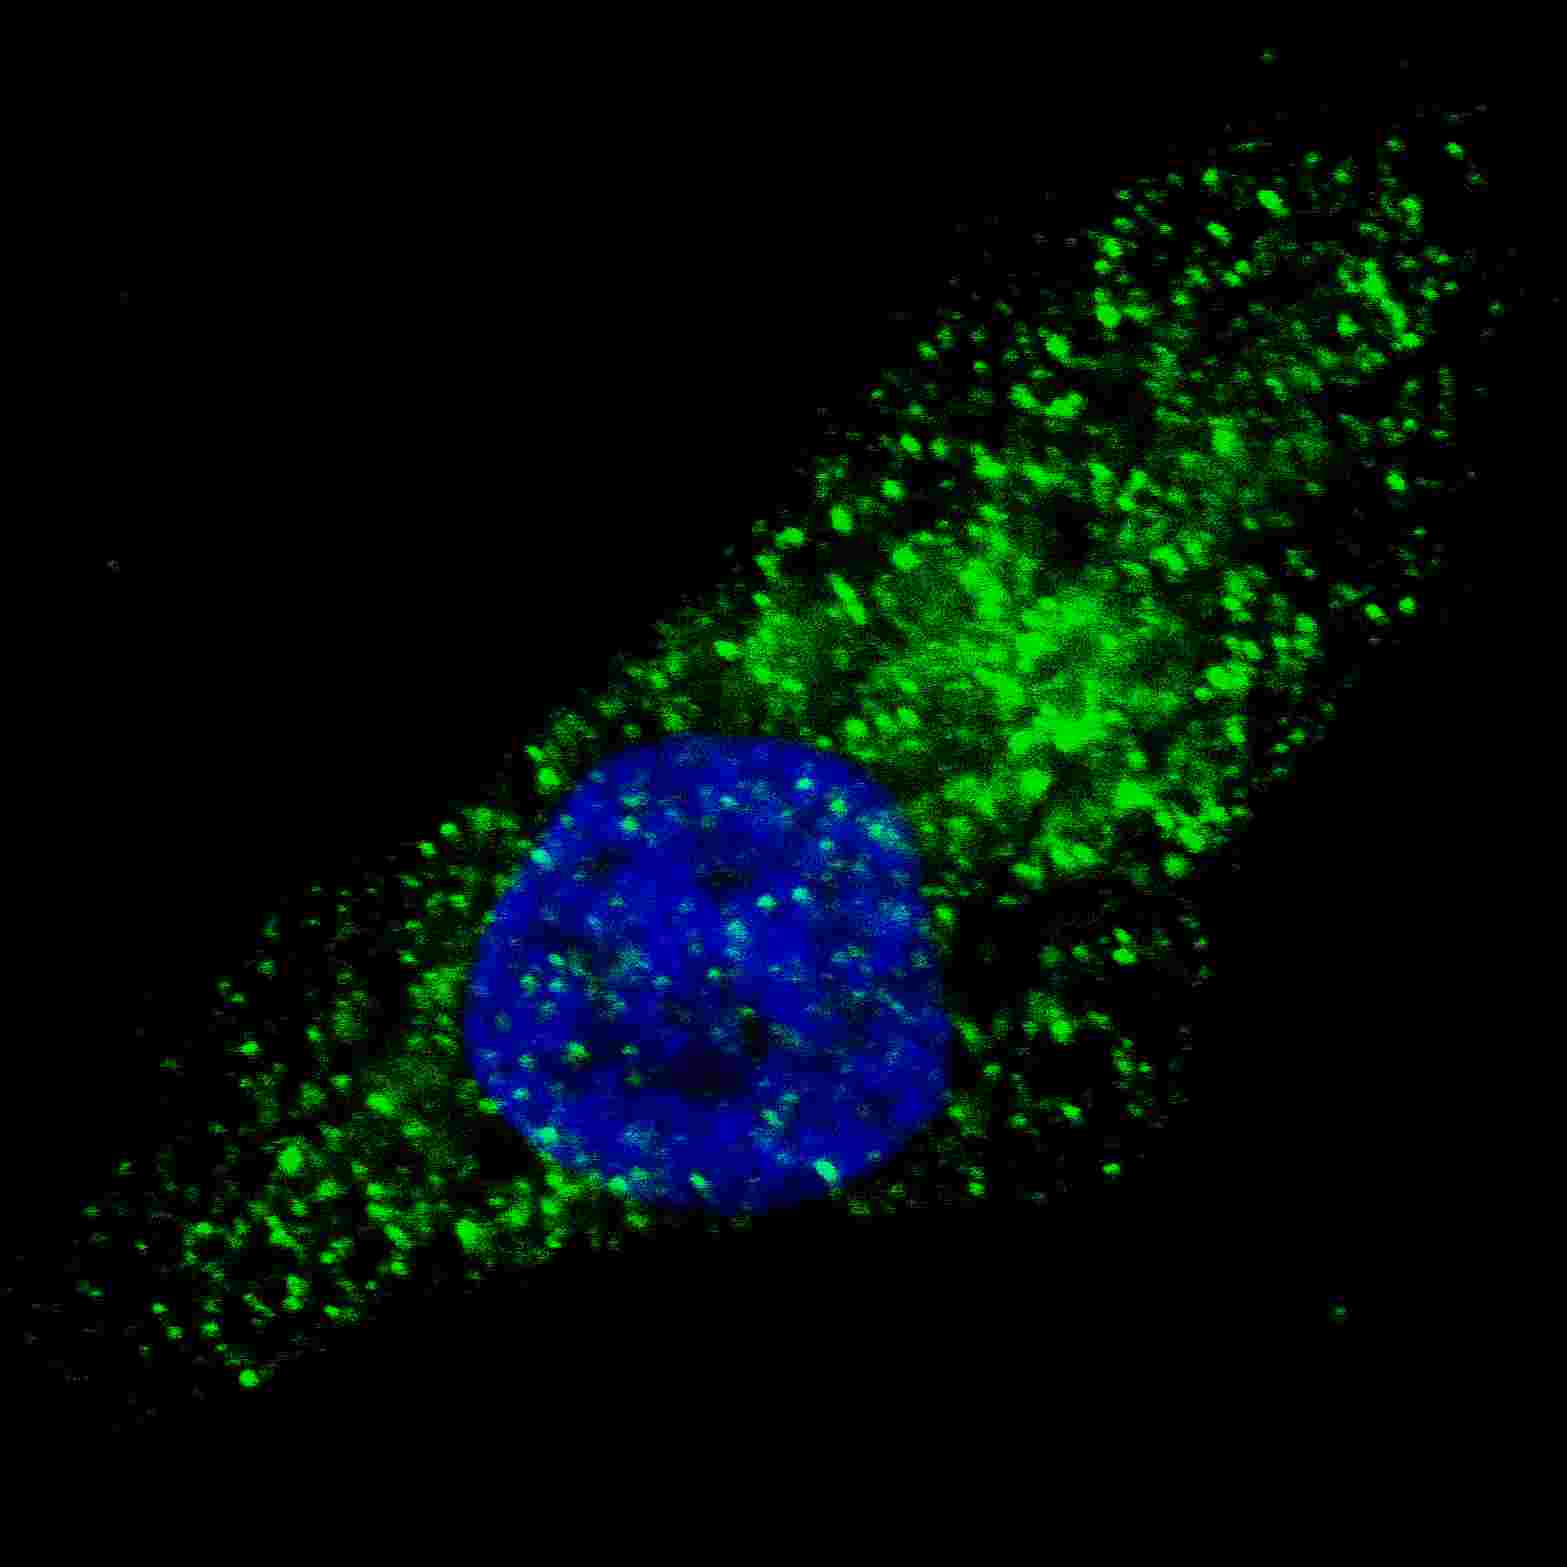 Fluorescent image of U251 cells stained with ATG9A (C-term) antibody. U251 cells were treated with Chloroquine (50 ?M,16h), then fixed with 4% PFA (20 min), permeabilized with Triton X-100 (0.2%, 30 min). Cells were then incubated with AP1814c ATG9A (C-term) primary antibody (1:100, 2 h at room temperature). For secondary antibody, Alexa Fluor� 488 conjugated donkey anti-rabbit antibody (green) was used (1:1000, 1h). Nuclei were counterstained with Hoechst 33342 (blue) (10 ?g/ml, 5 min). ATG9A immunoreactivity is localized to autophagic vacuoles in the cytoplasm of U251 cells. 